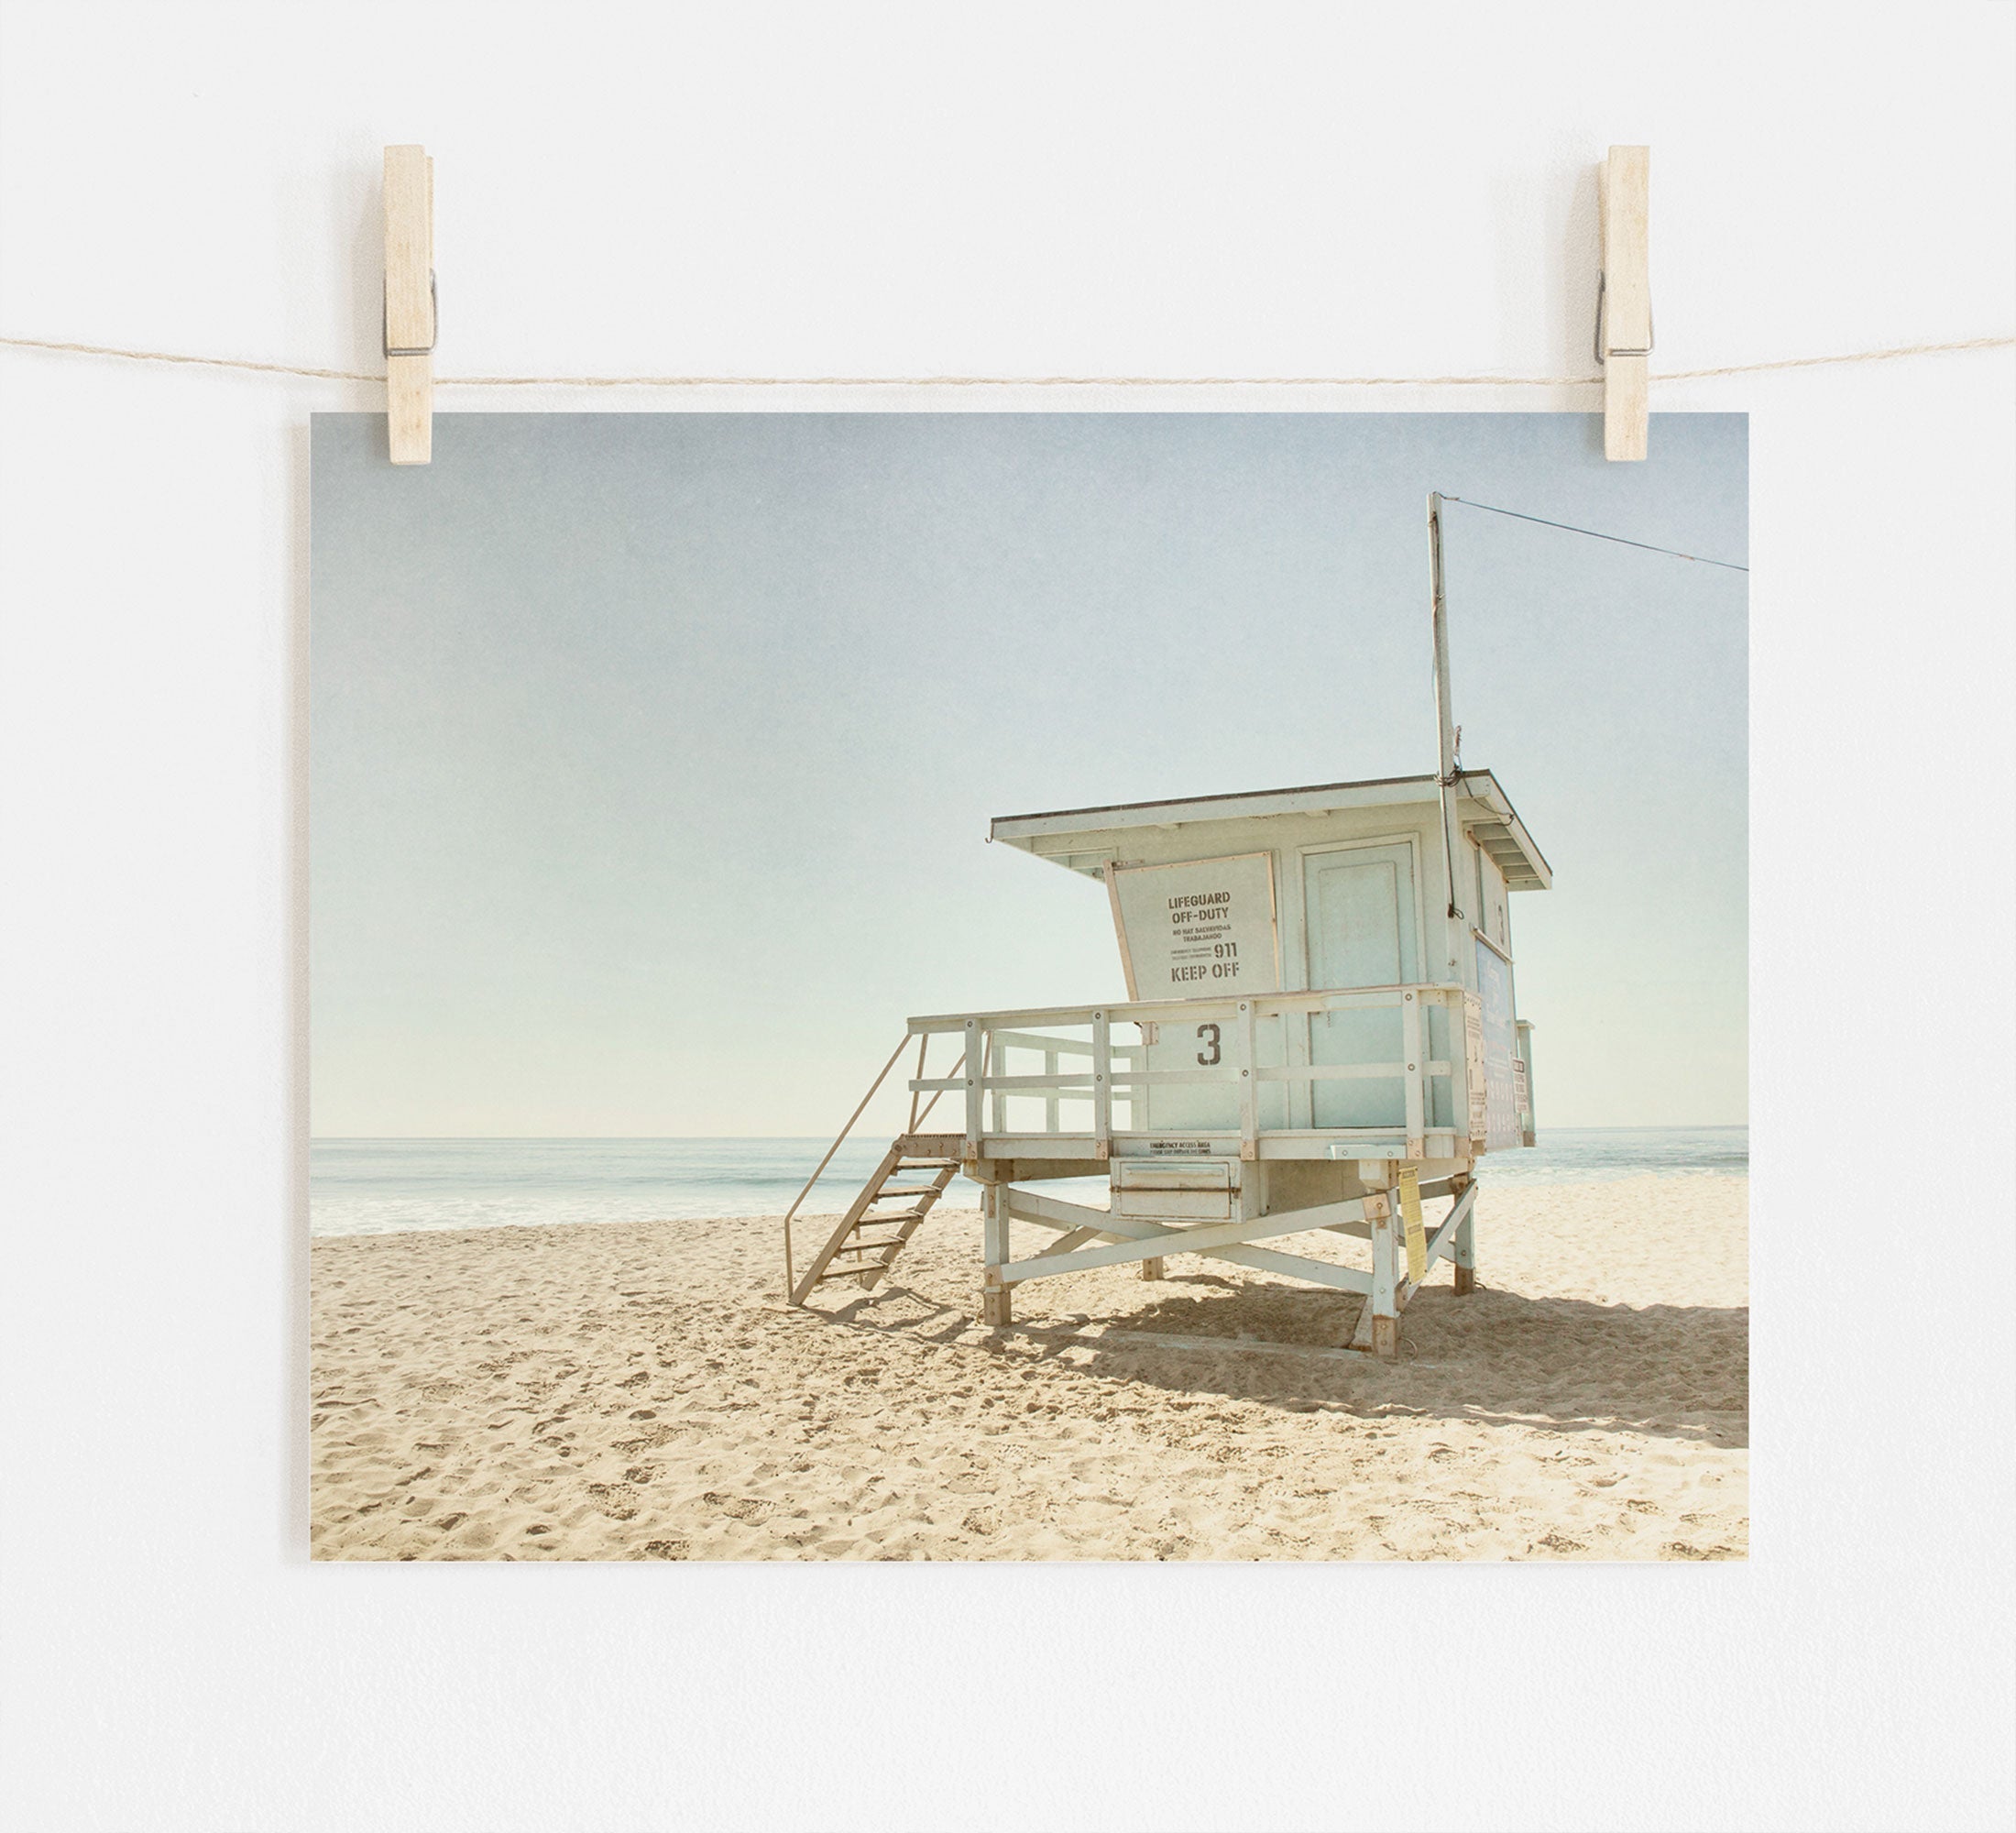 A photo of Offley Green&#39;s California Summer Beach Art, &#39;Malibu Lifeguard Tower&#39;, numbered &quot;3&quot; on Malibu beach, pinned by wooden clothespins on a line, set against a scene with soft sand and a clear sky.